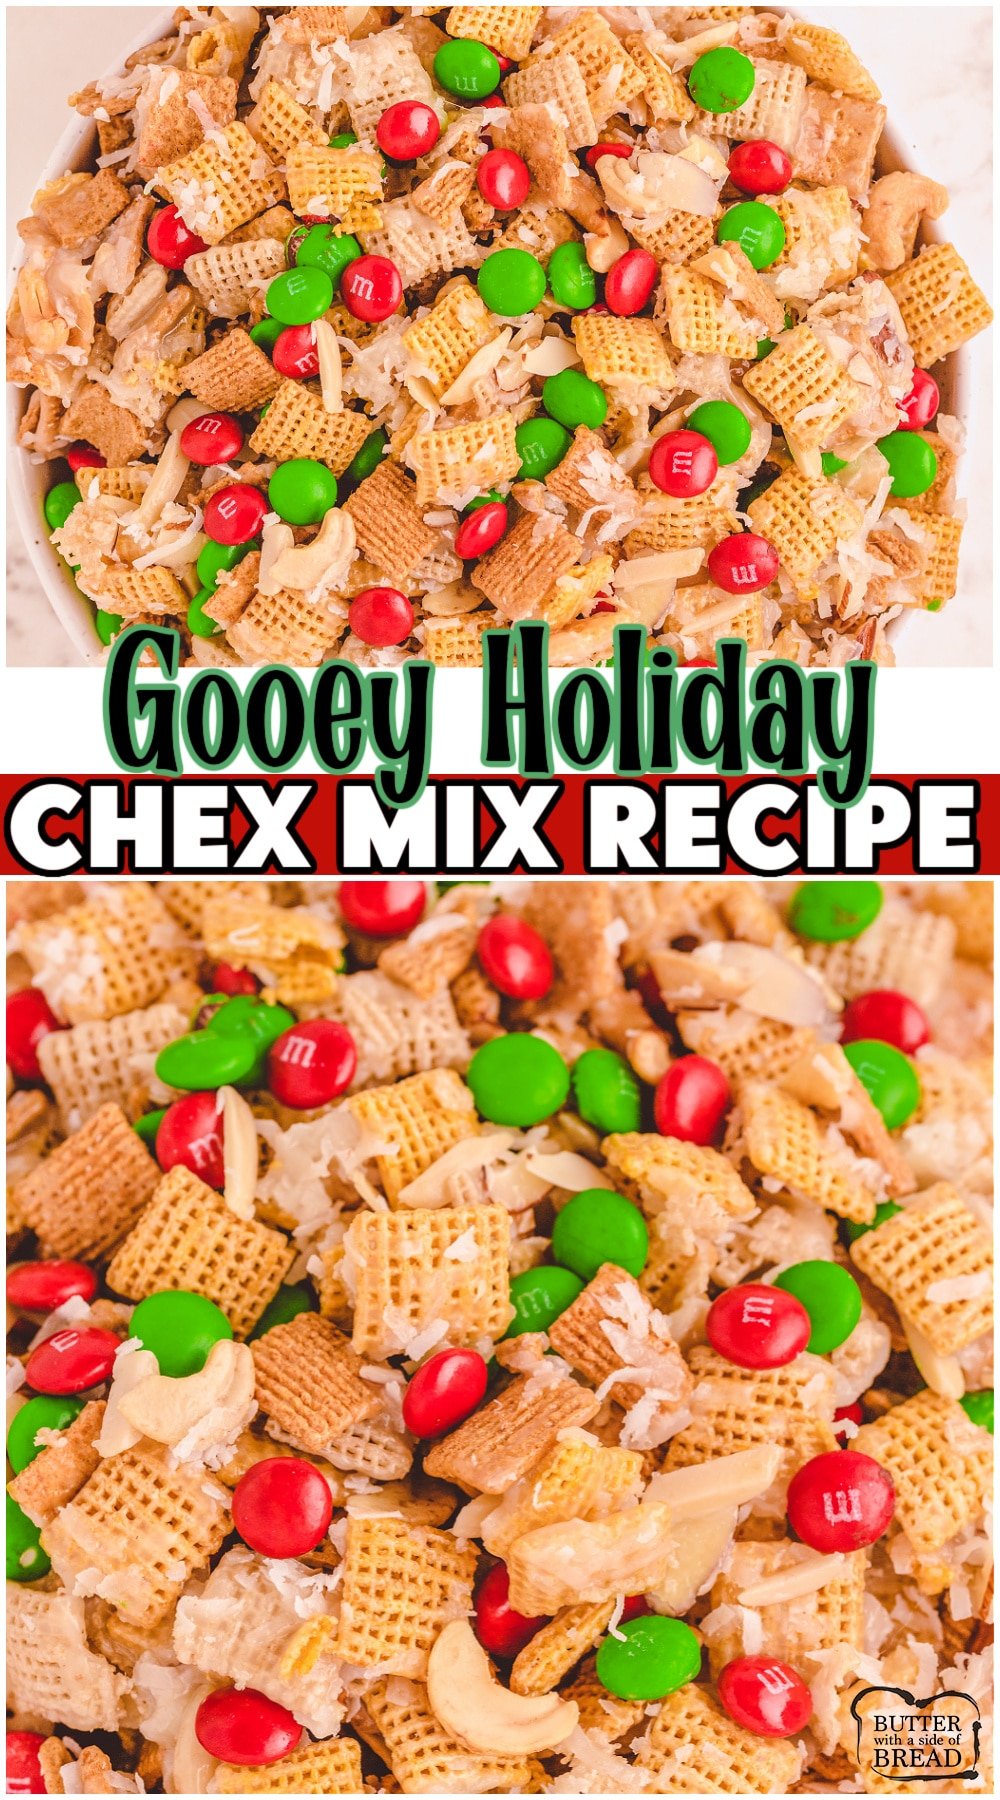 Gooey Holiday Chex Mix is a absolute classic Christmas treat! Chex cereal, coconut, slivered almonds & M&M's combine in a wonderfully addictive sweet snack mix. Perfect for holiday trays & gifts!